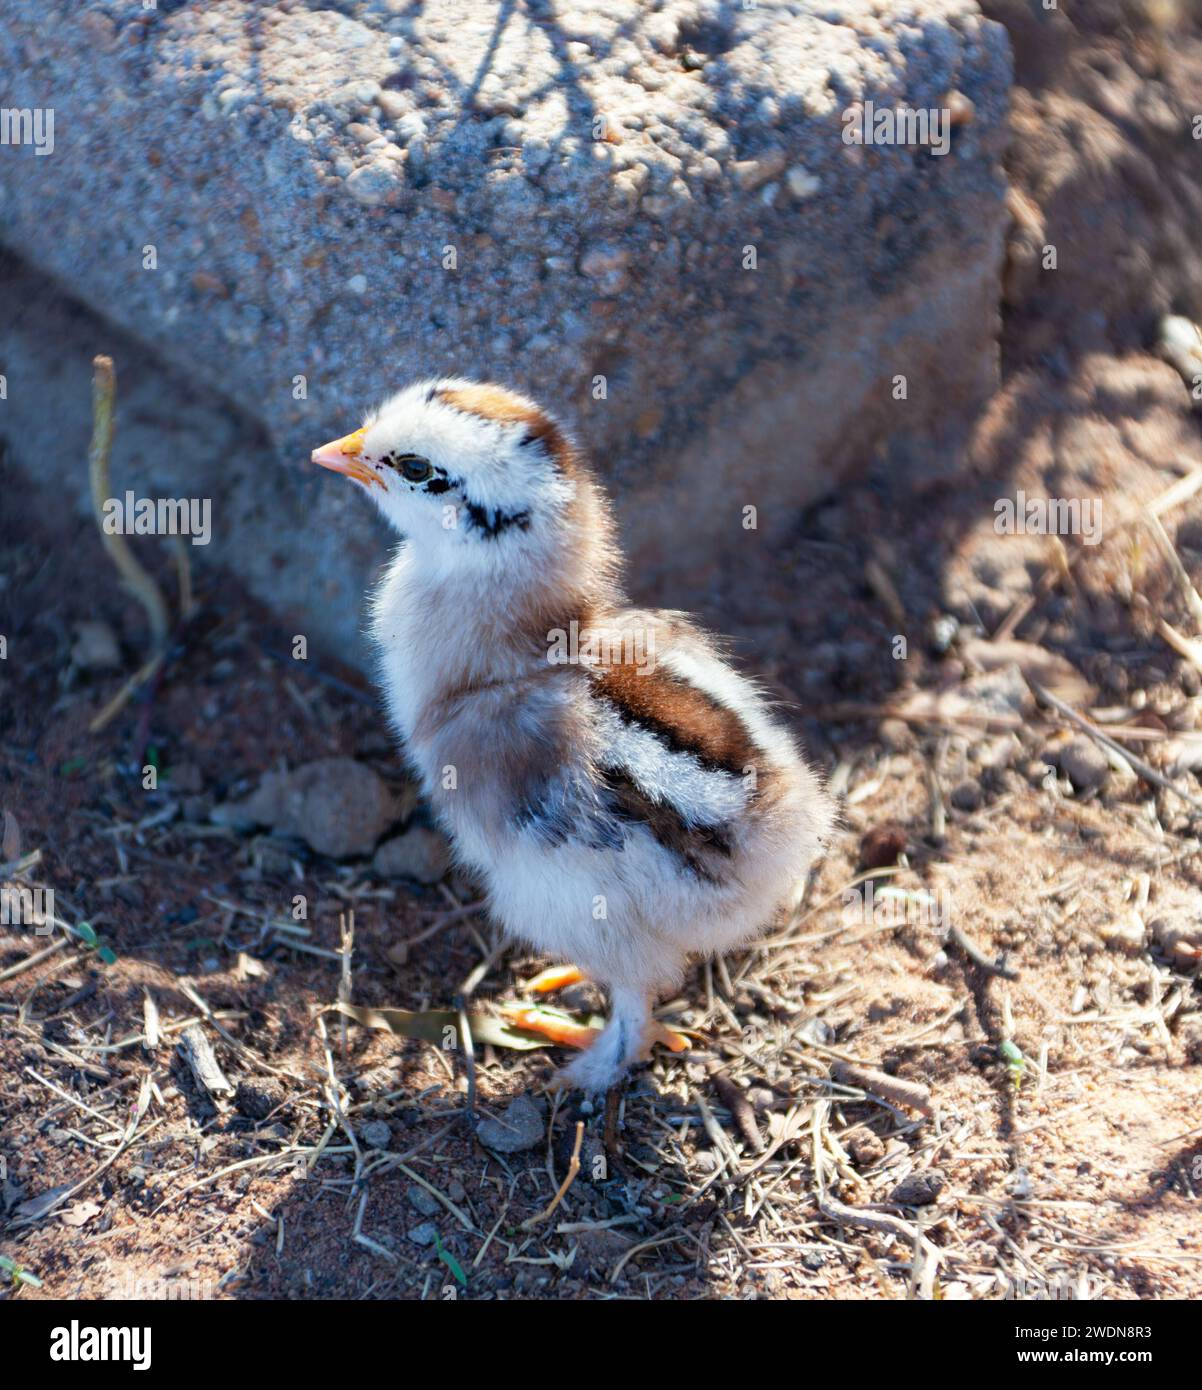 chicken one day old running in the dirt searching for food in the yard, new hatched baby chick Stock Photo